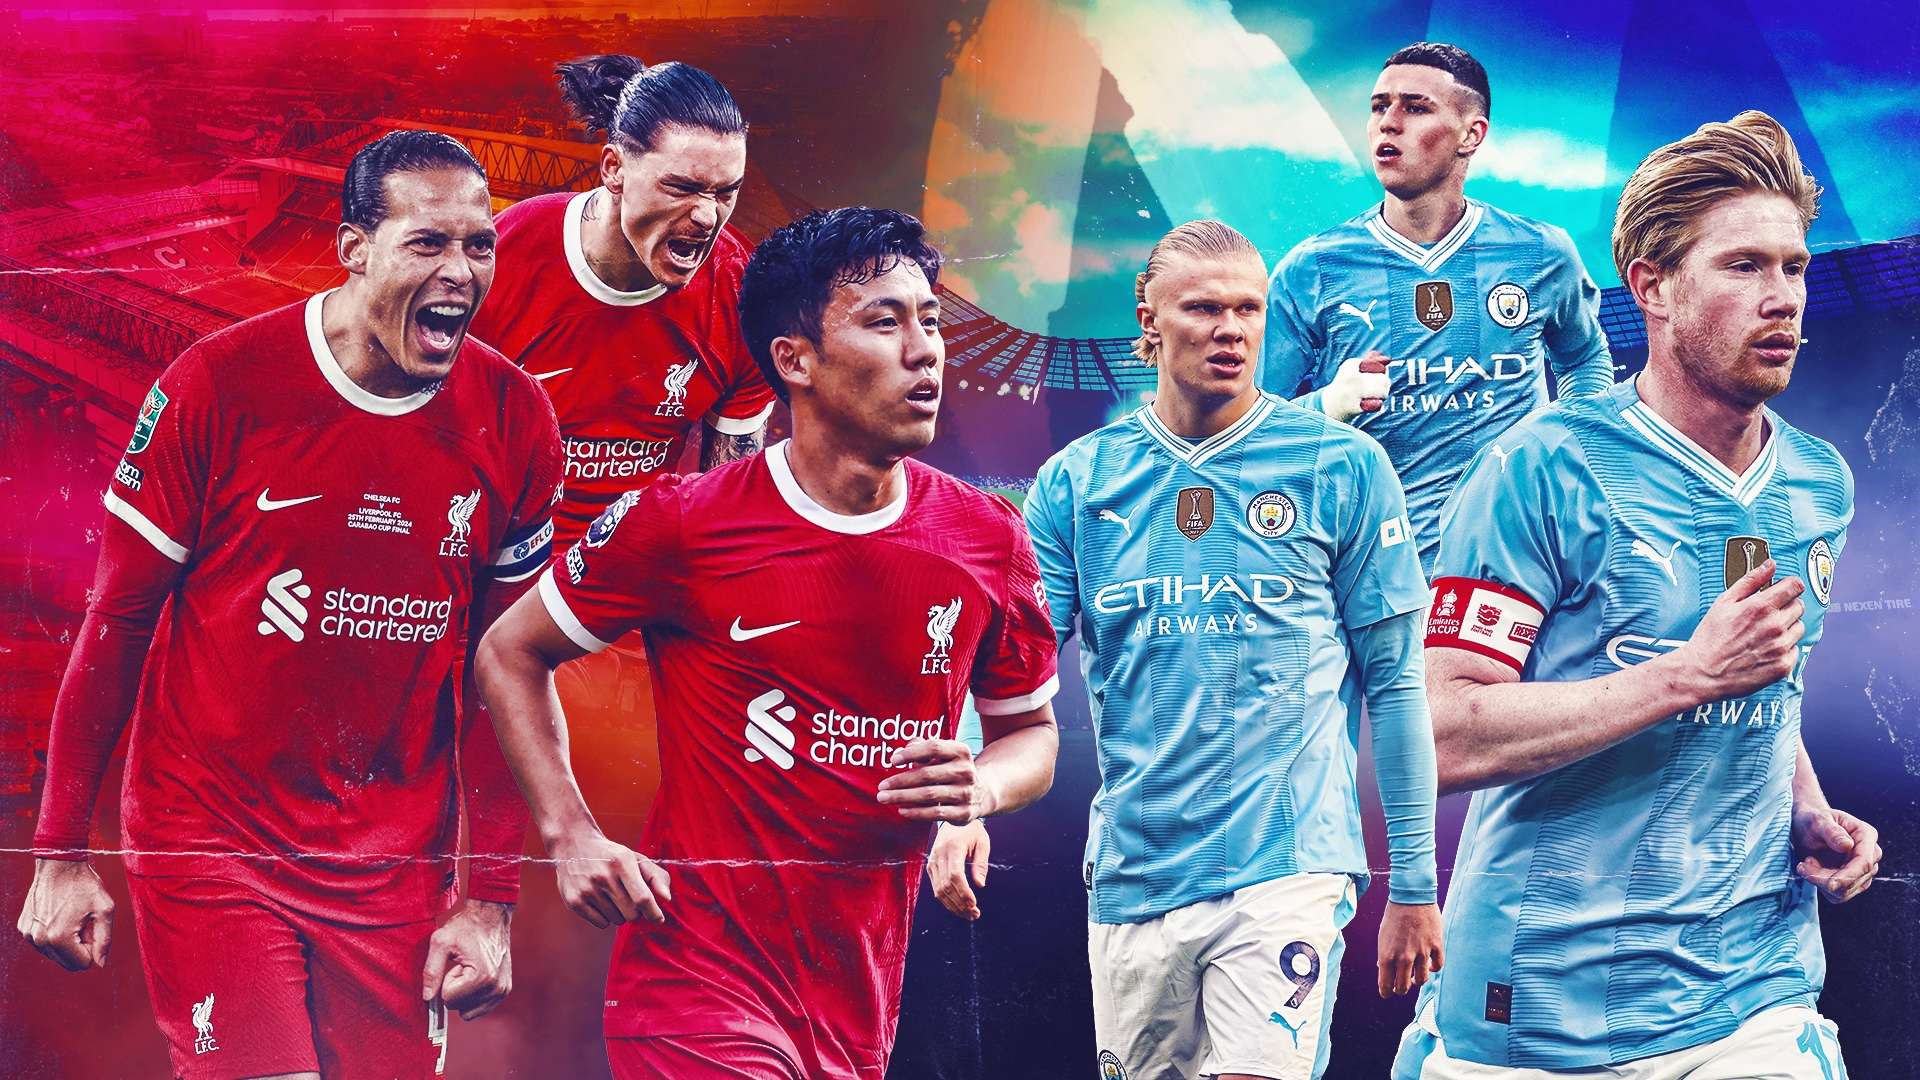 liverpool manchester city